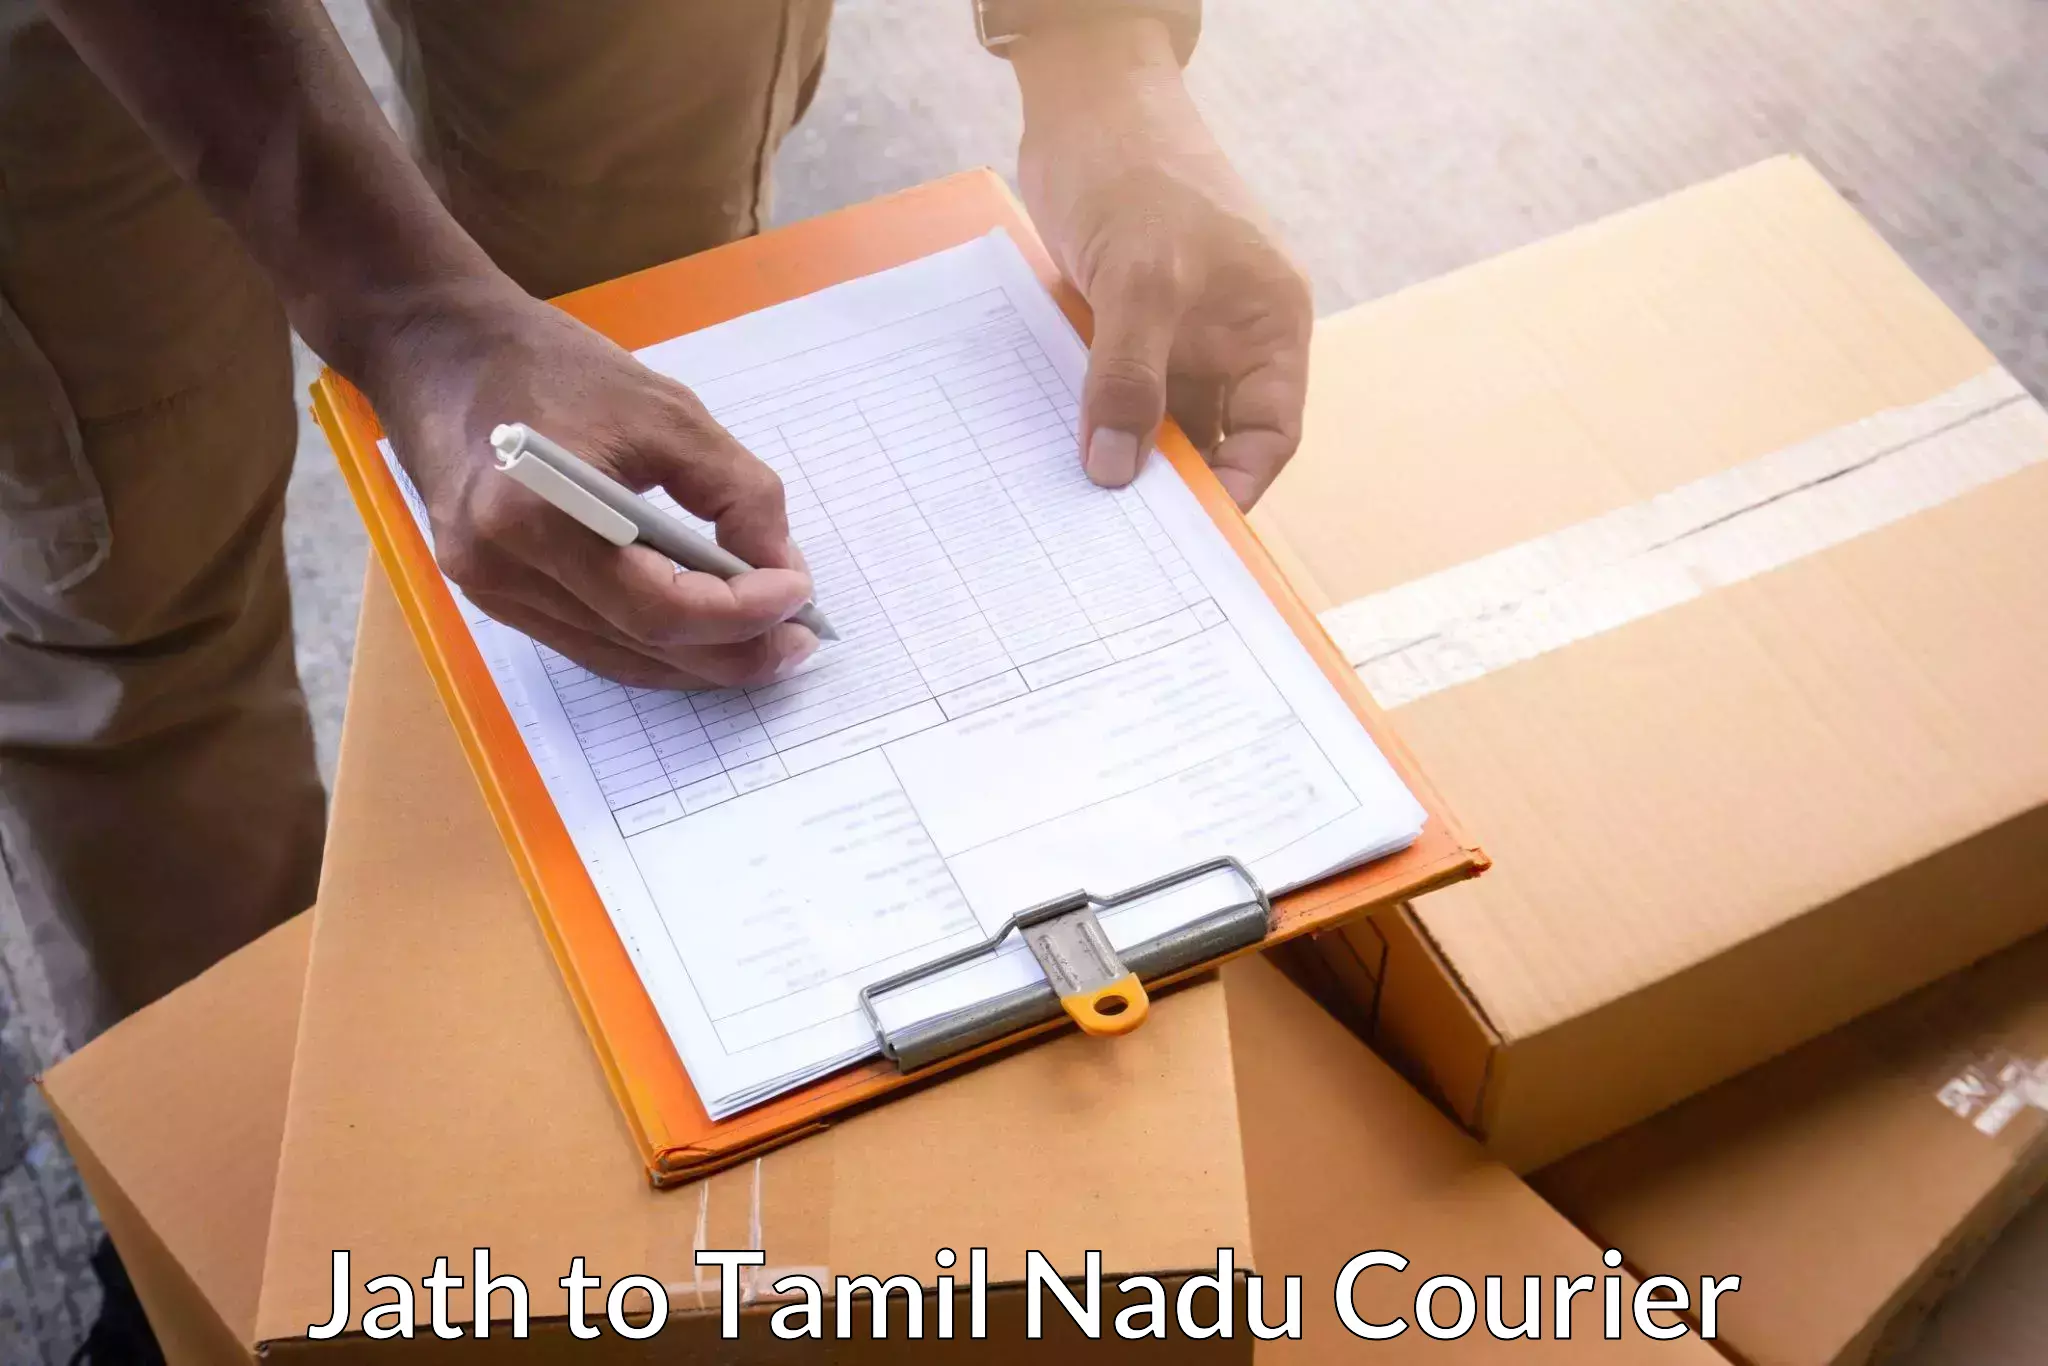 Package delivery network Jath to Velur